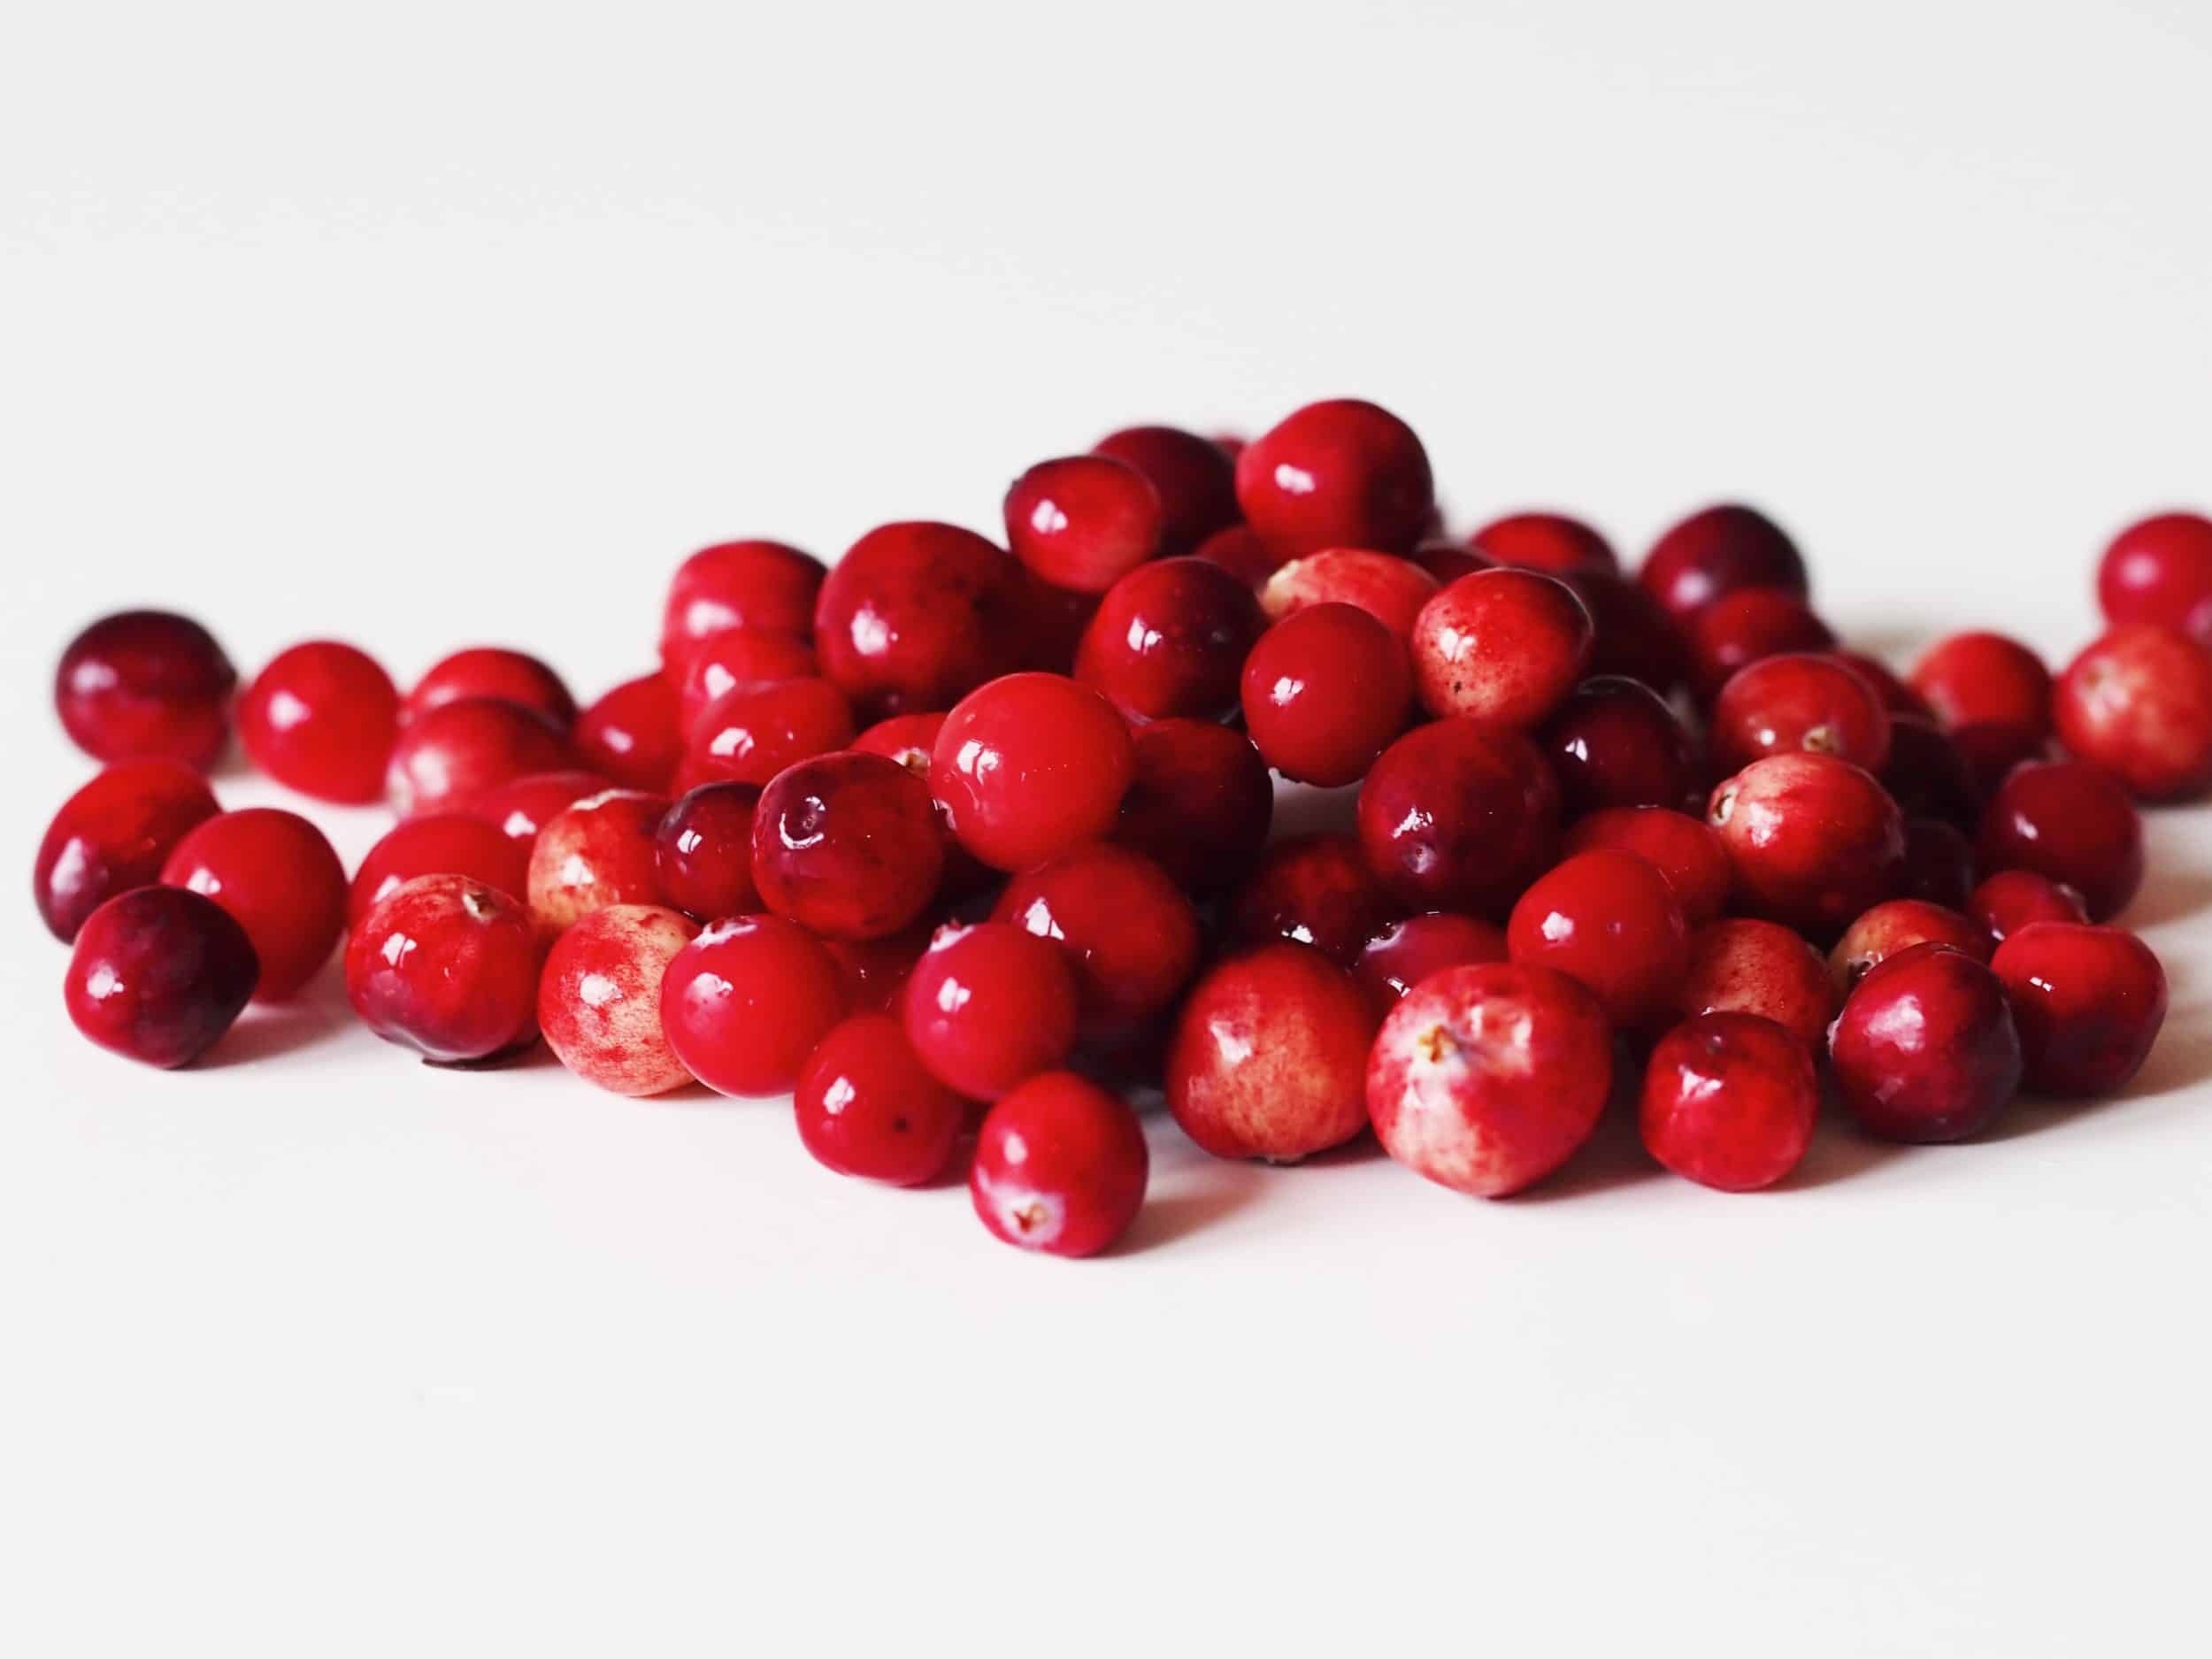 Cranberries for babies, Nutritious first foods, Solid start, Healthy toddlers, 2500x1880 HD Desktop